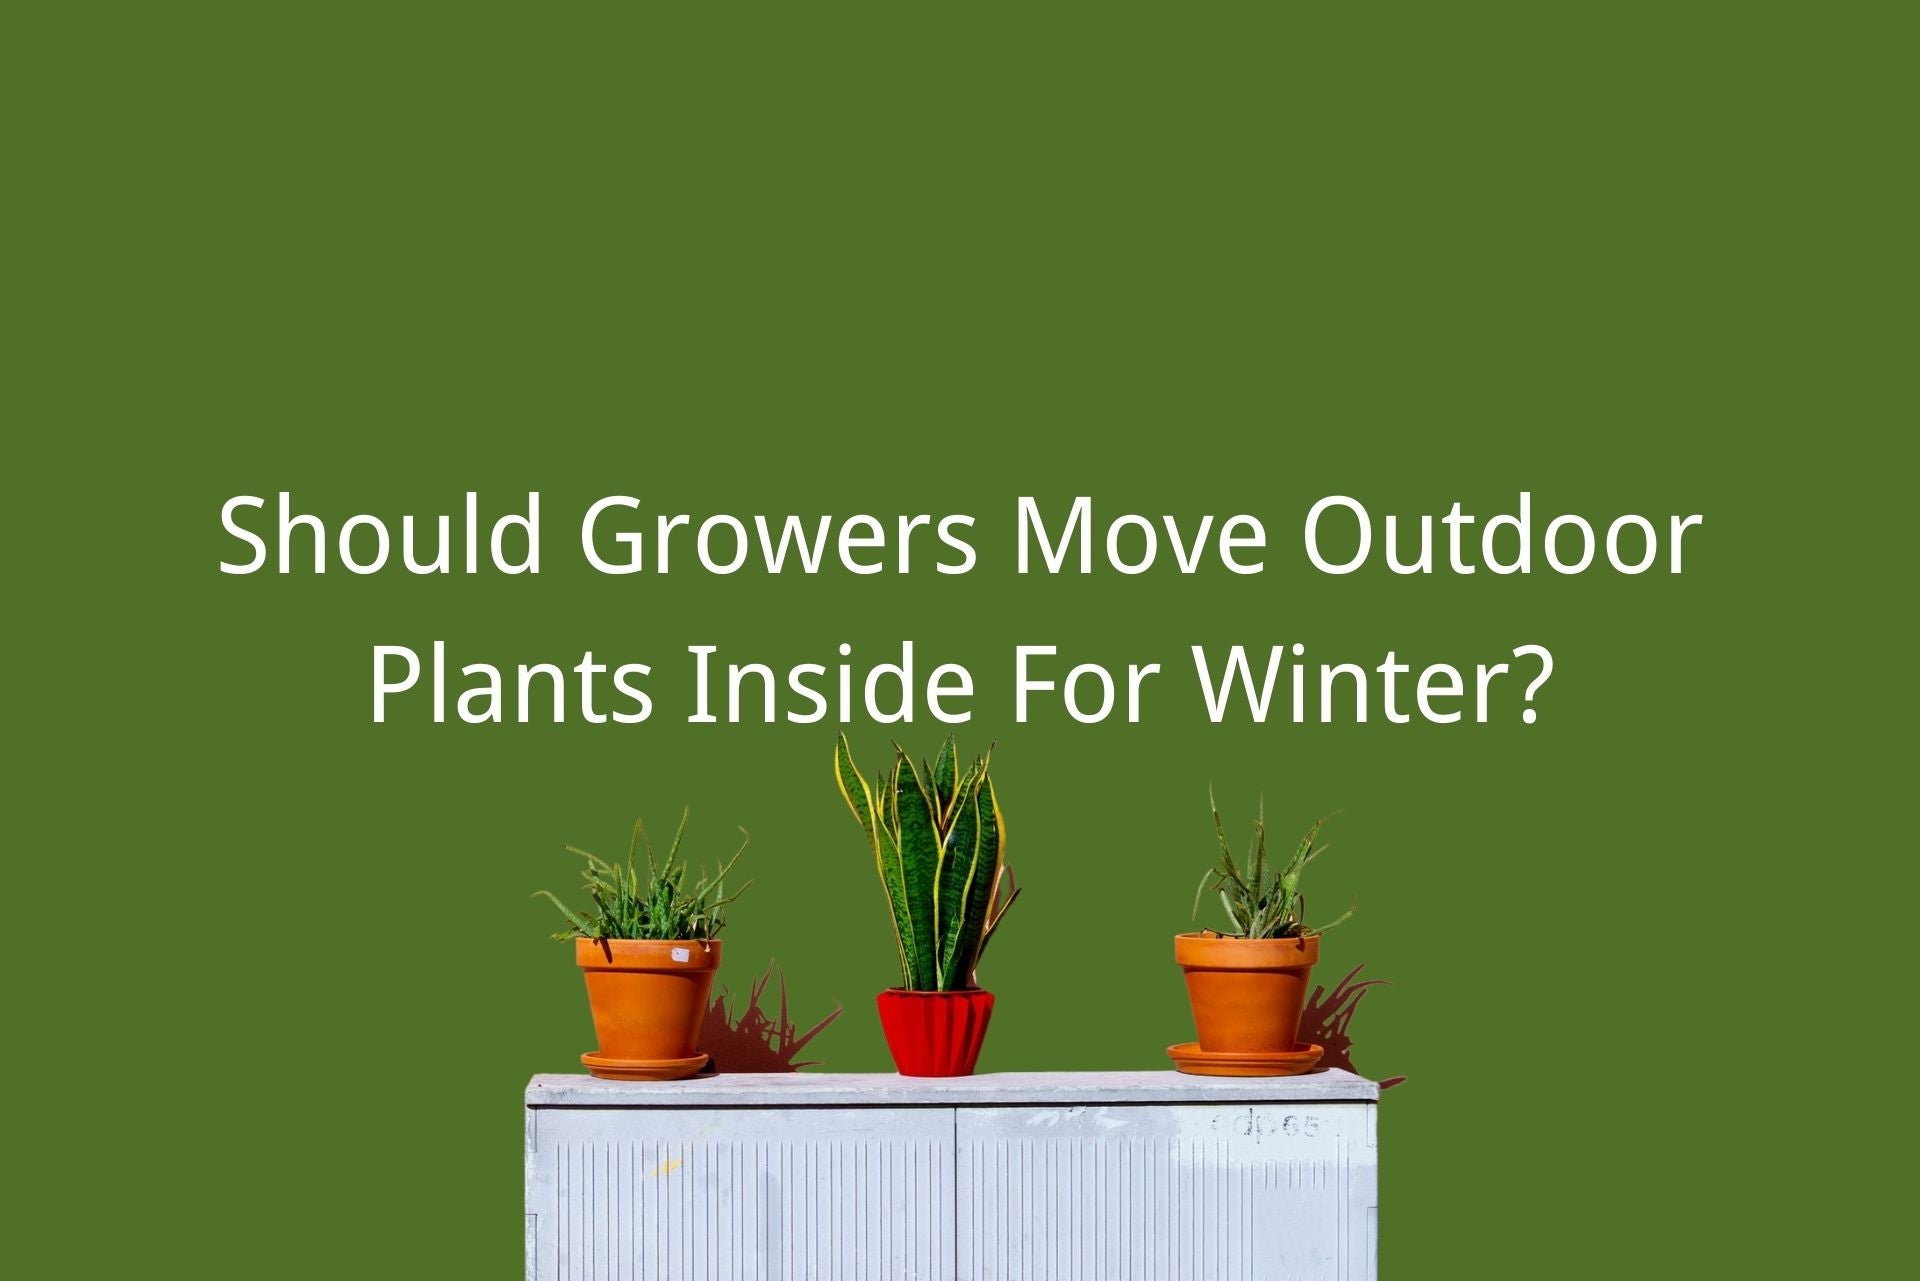 move outdoor plants inside for winter